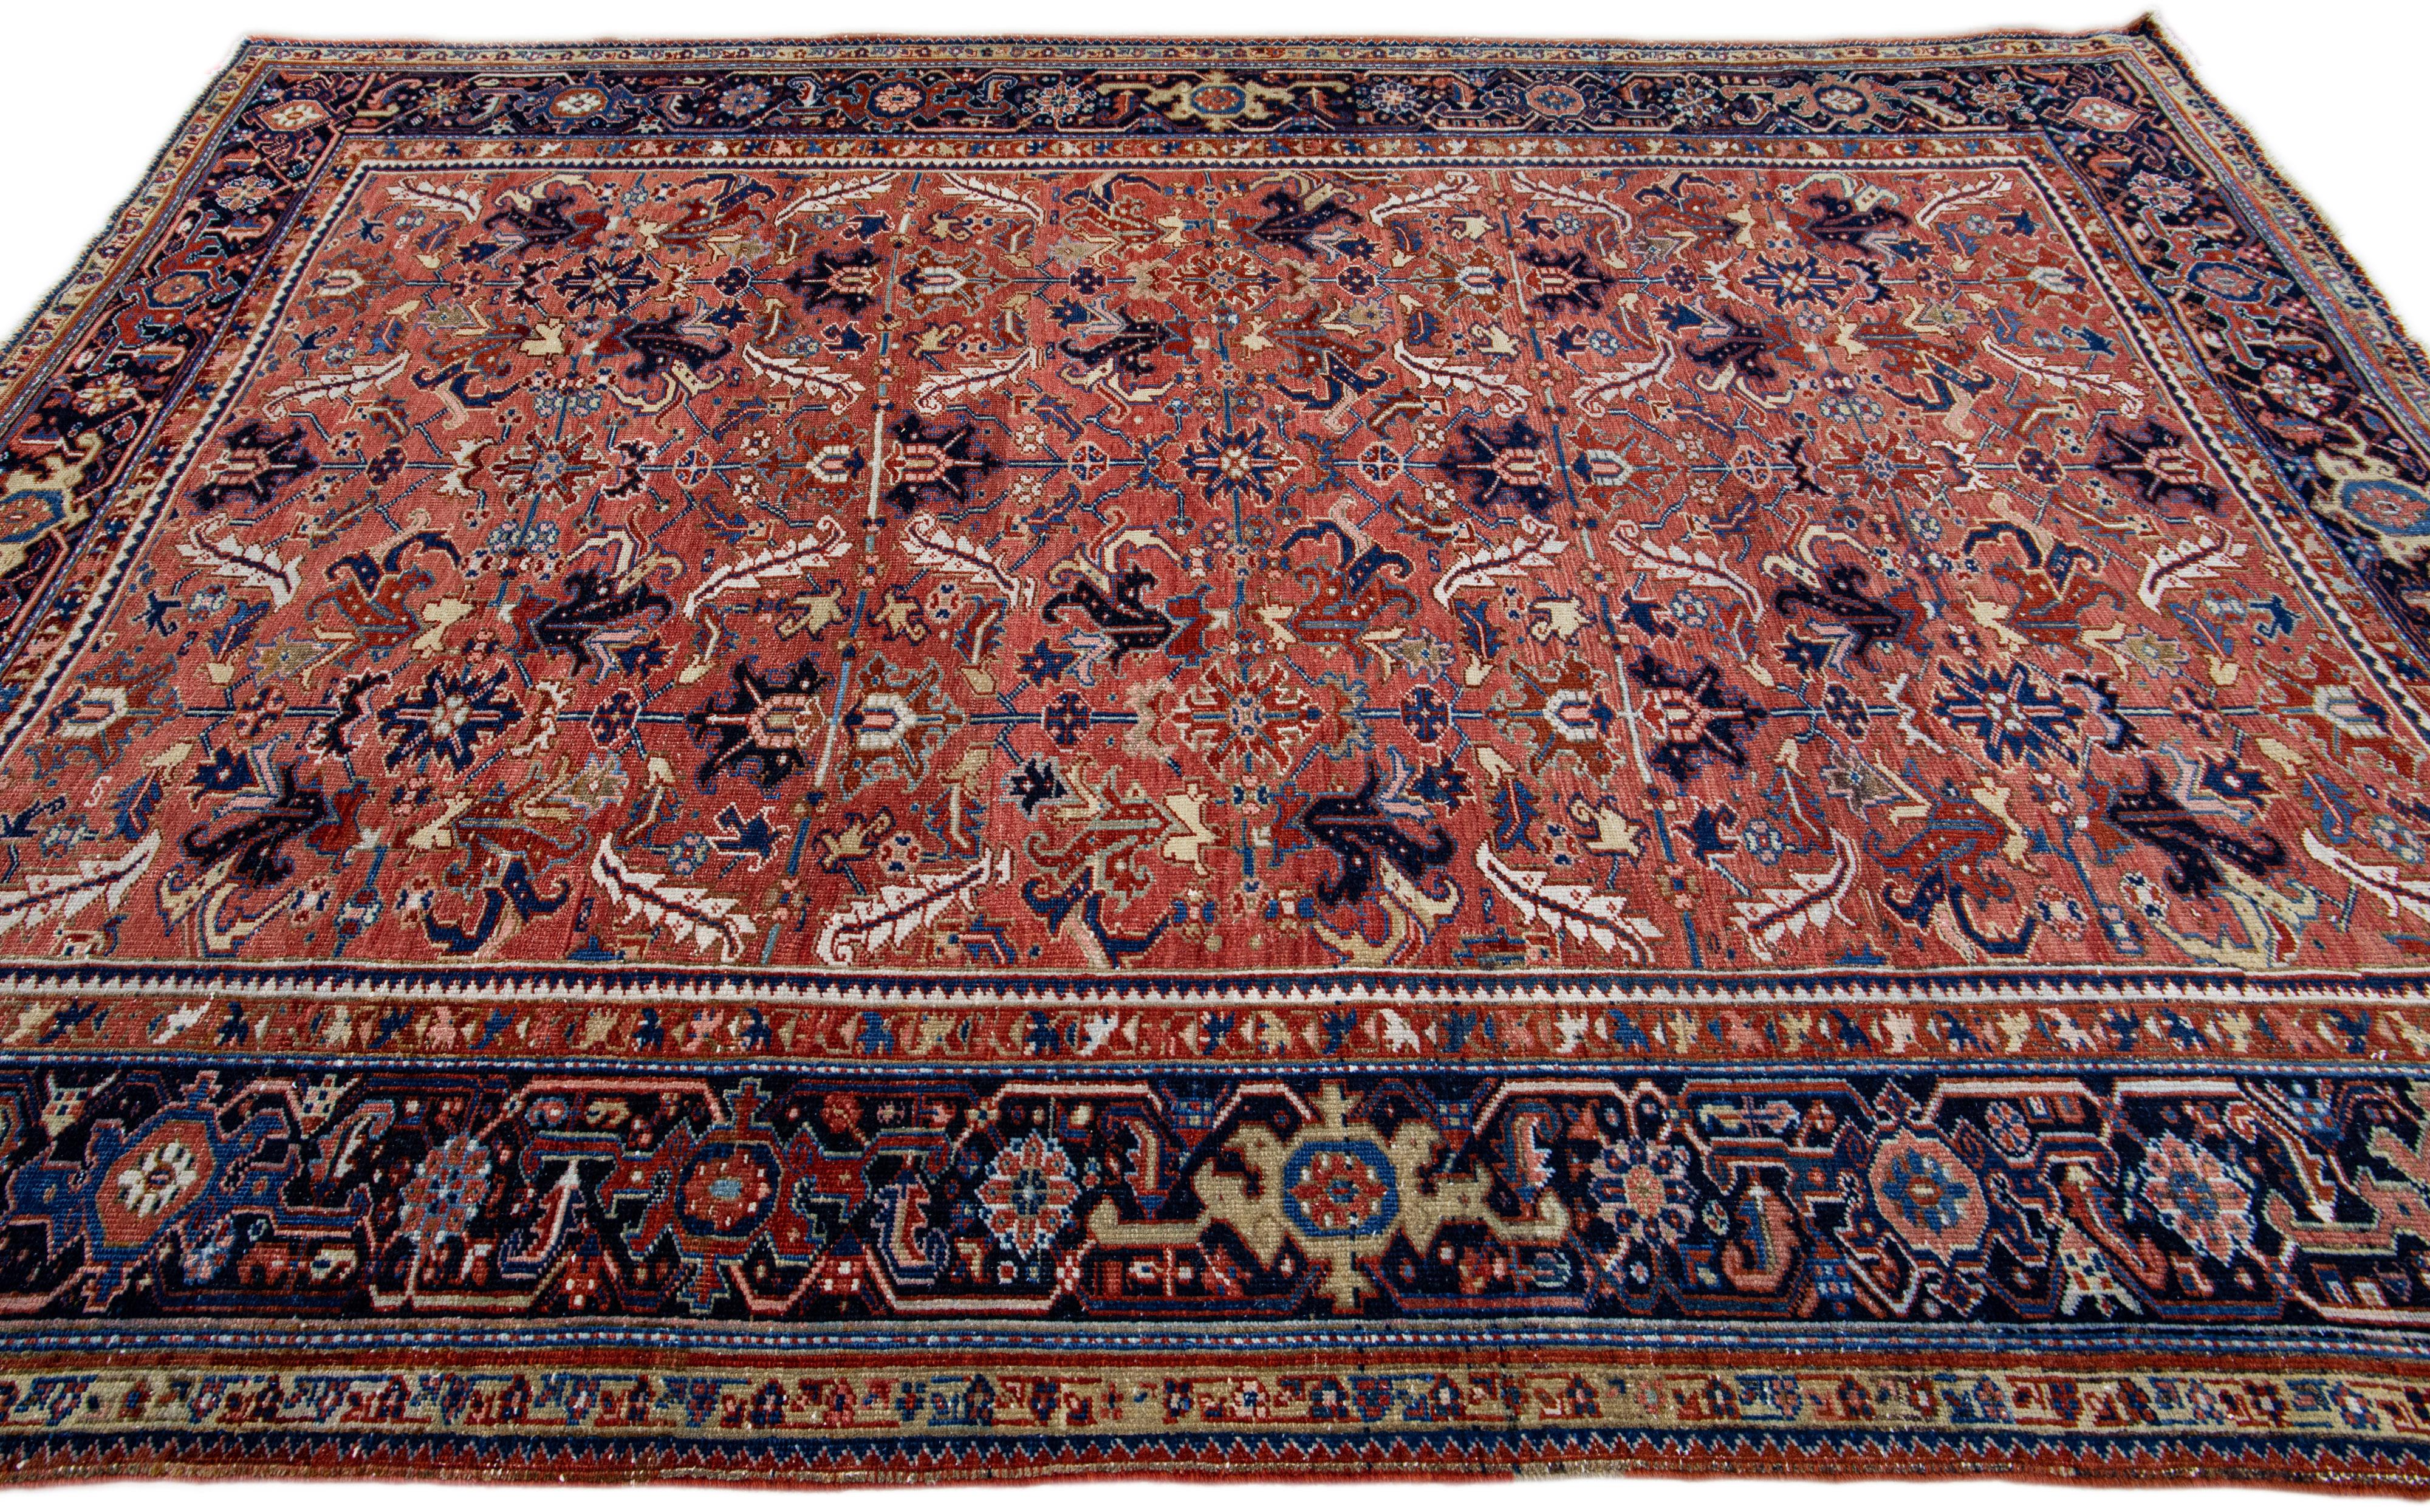 Antique Persian Heriz Handmade Geometric Allover Rusted Wool Rug In Good Condition For Sale In Norwalk, CT